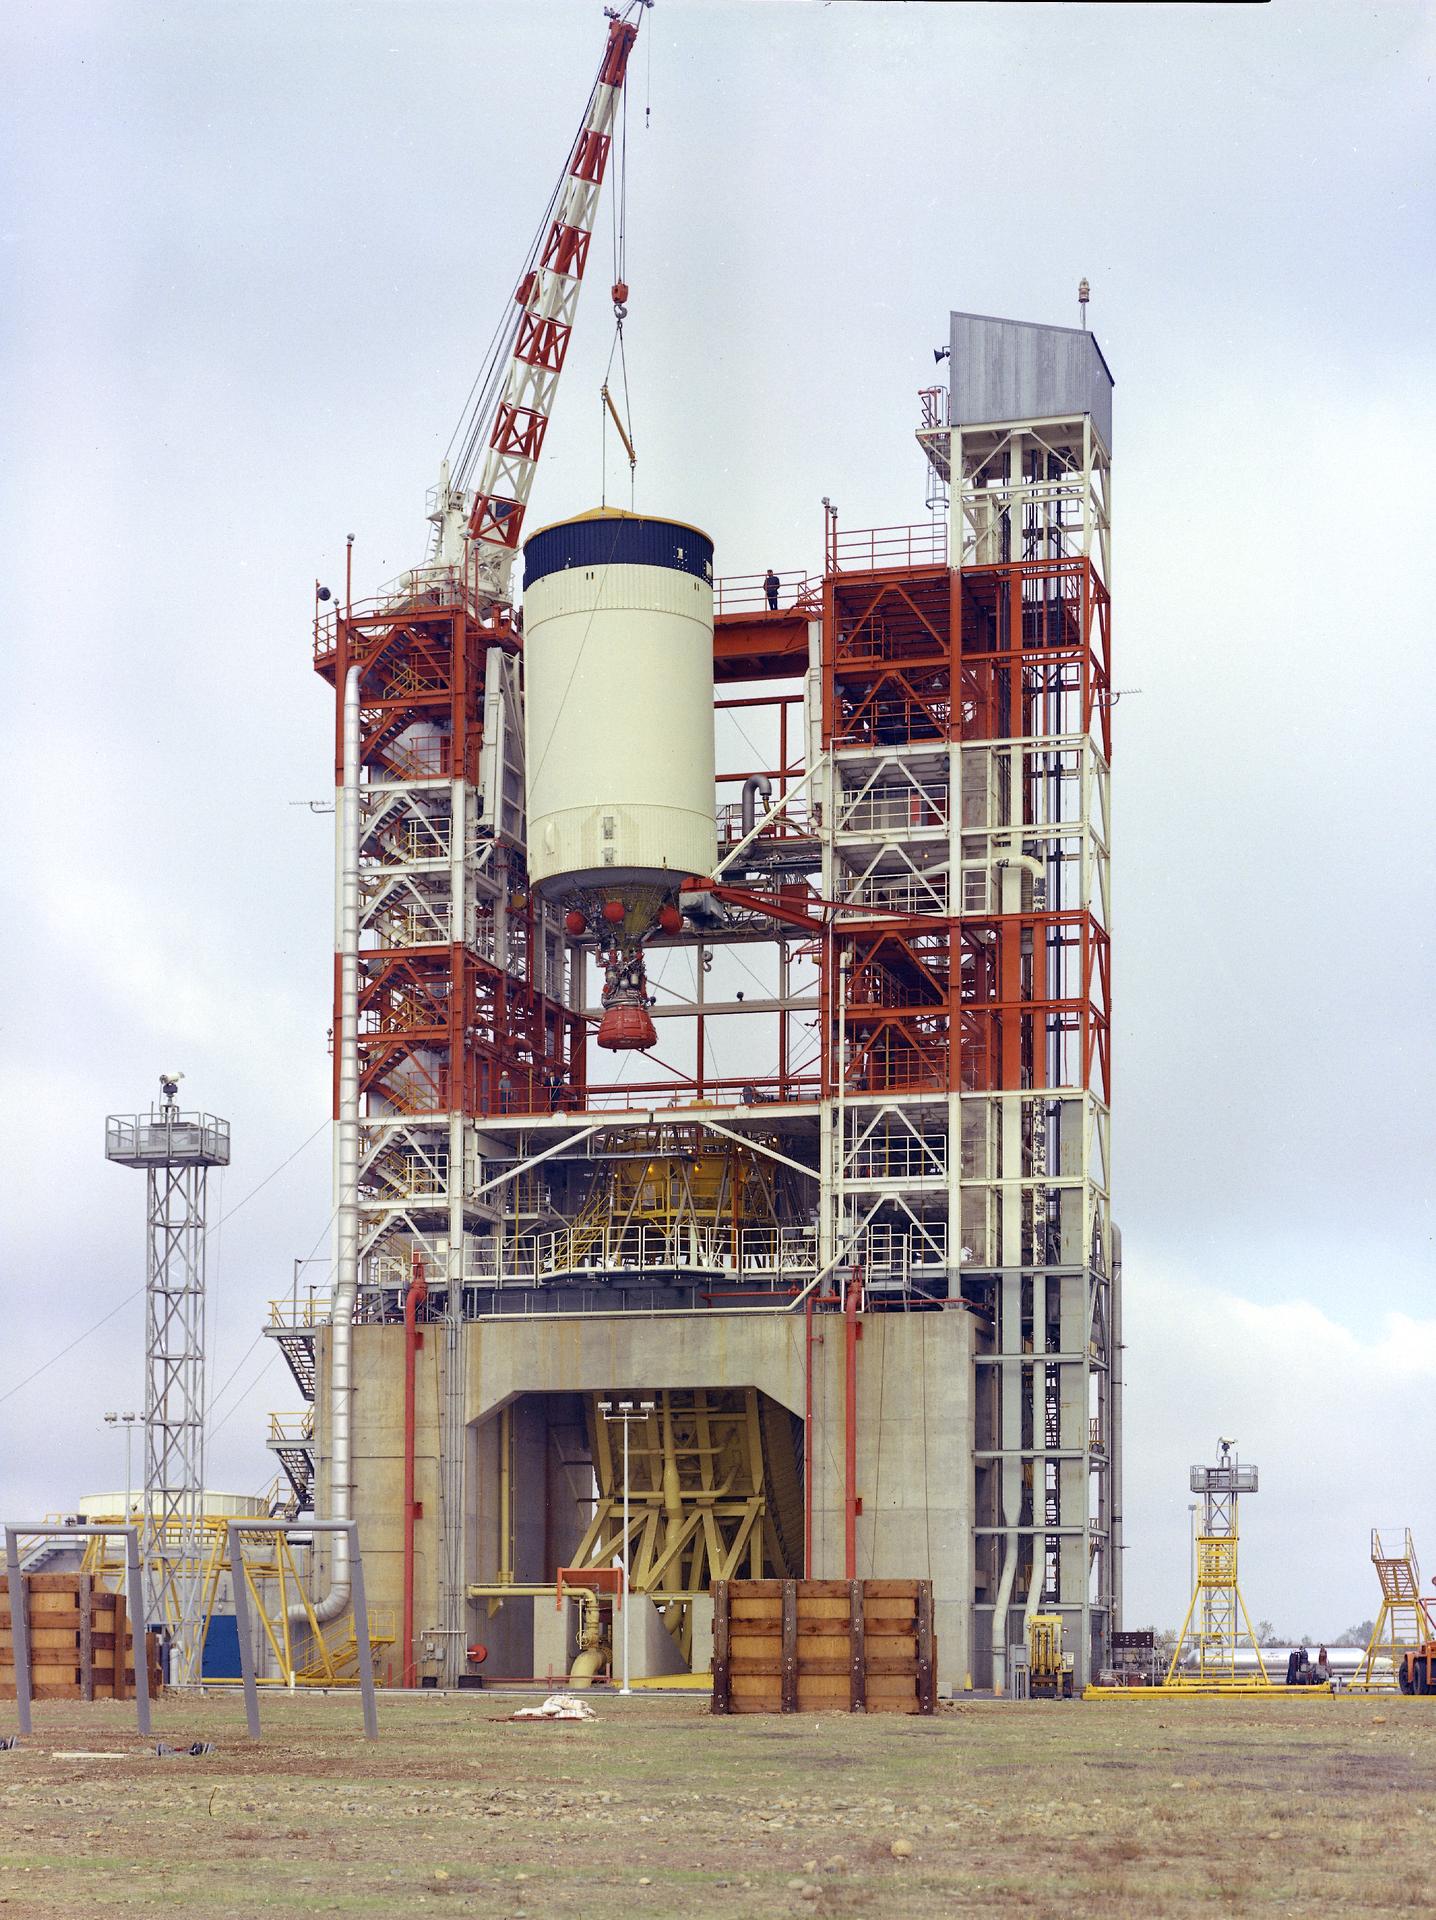 The Apollo 10 S-IVB stage being hoisted out of the Beta Test Stand 1 at SACTO after its static firing. (Source: NASA)